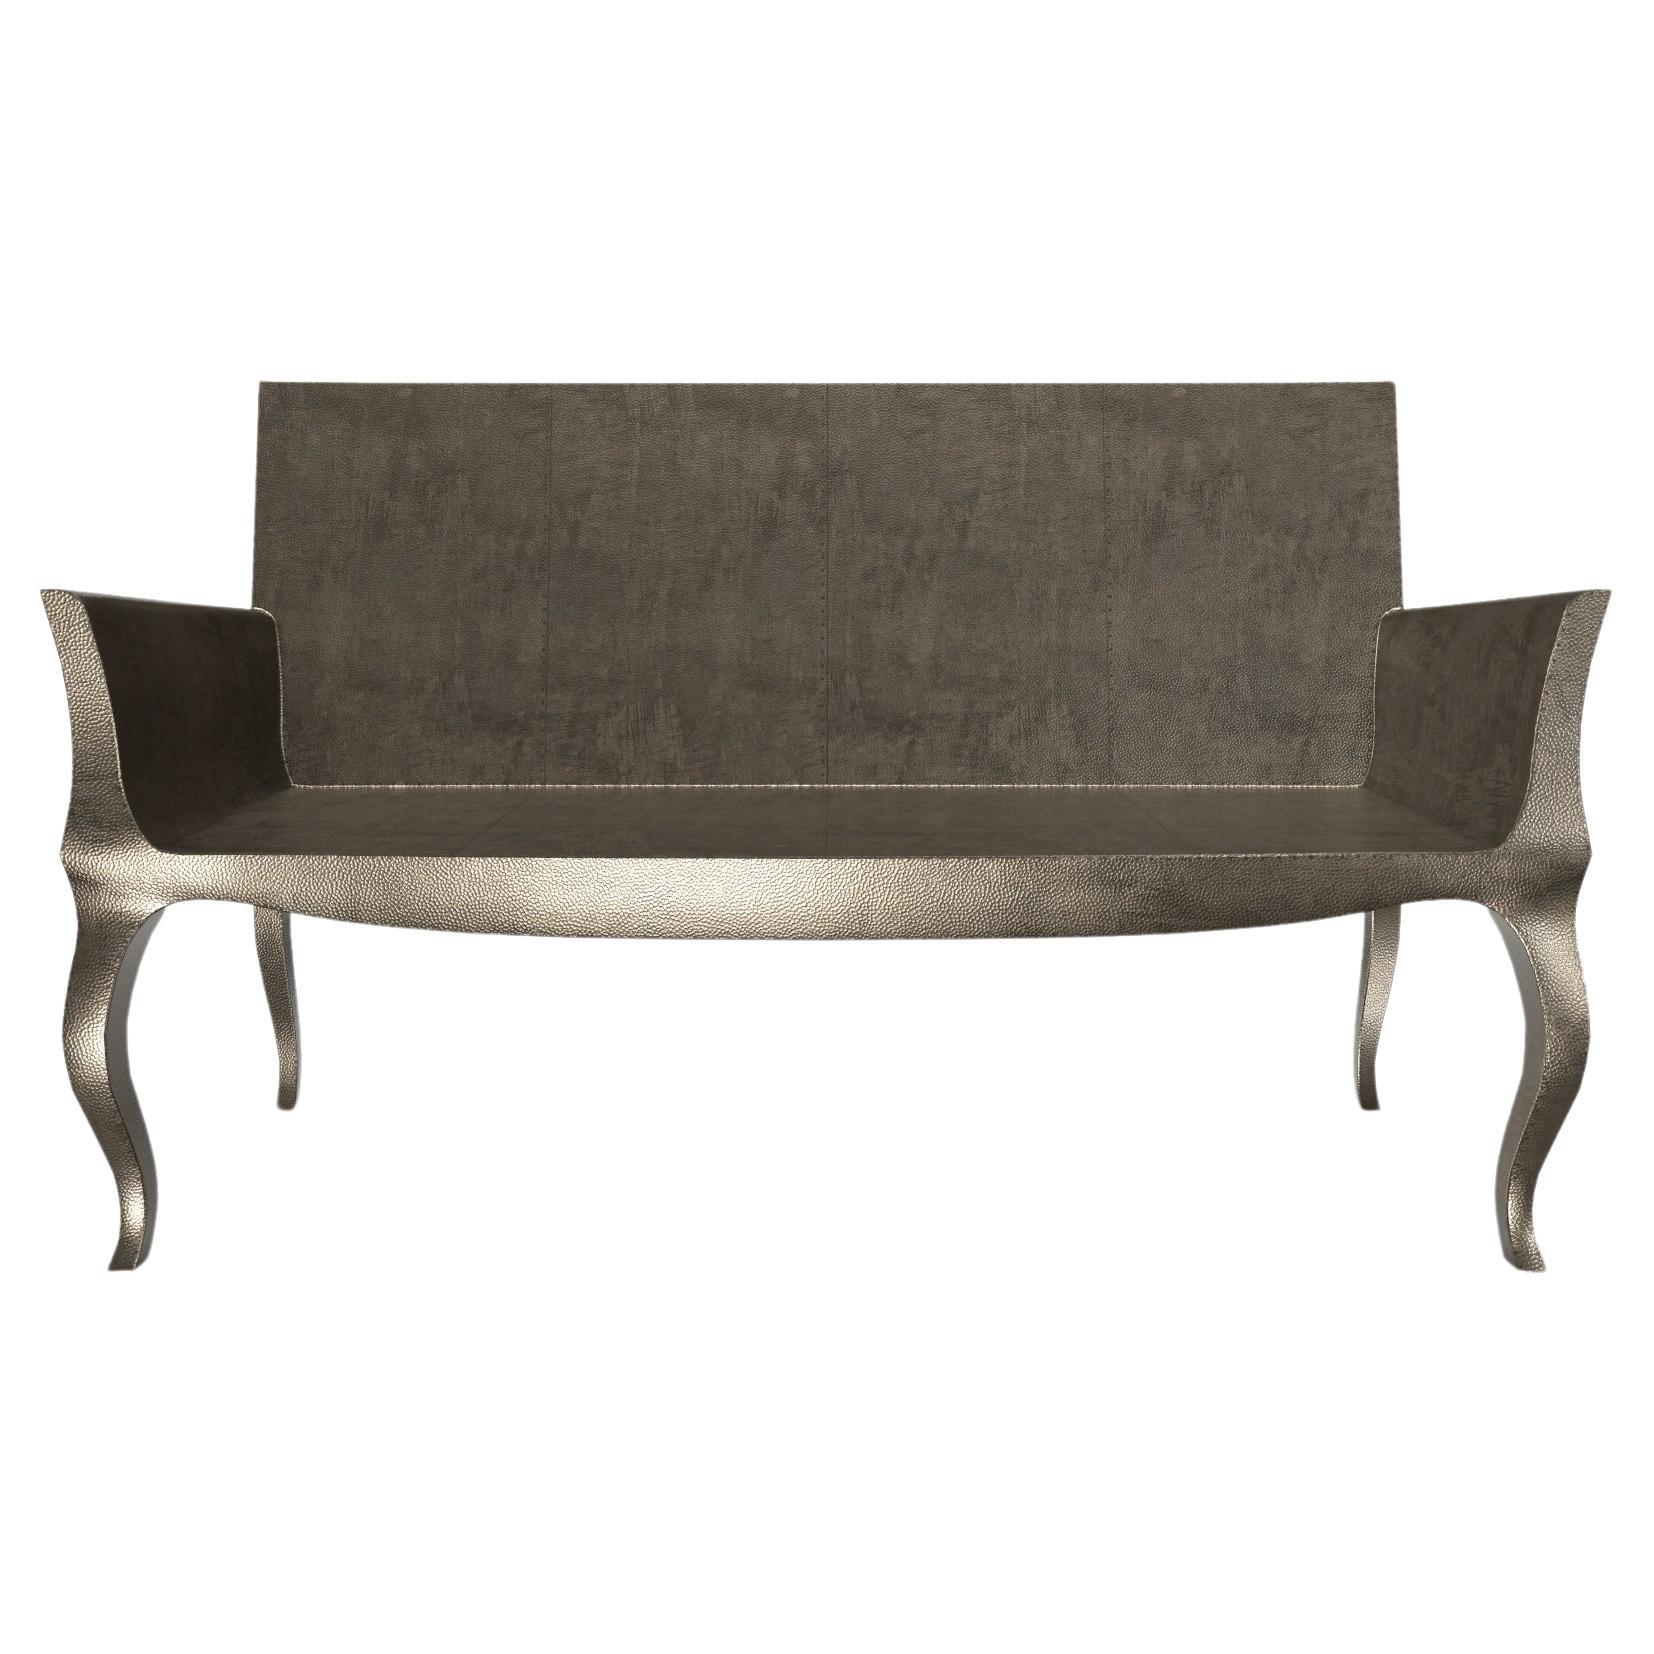 Louise Settee Art Deco Benches in Mid. Hammered Antique Bronze by Paul Mathieu